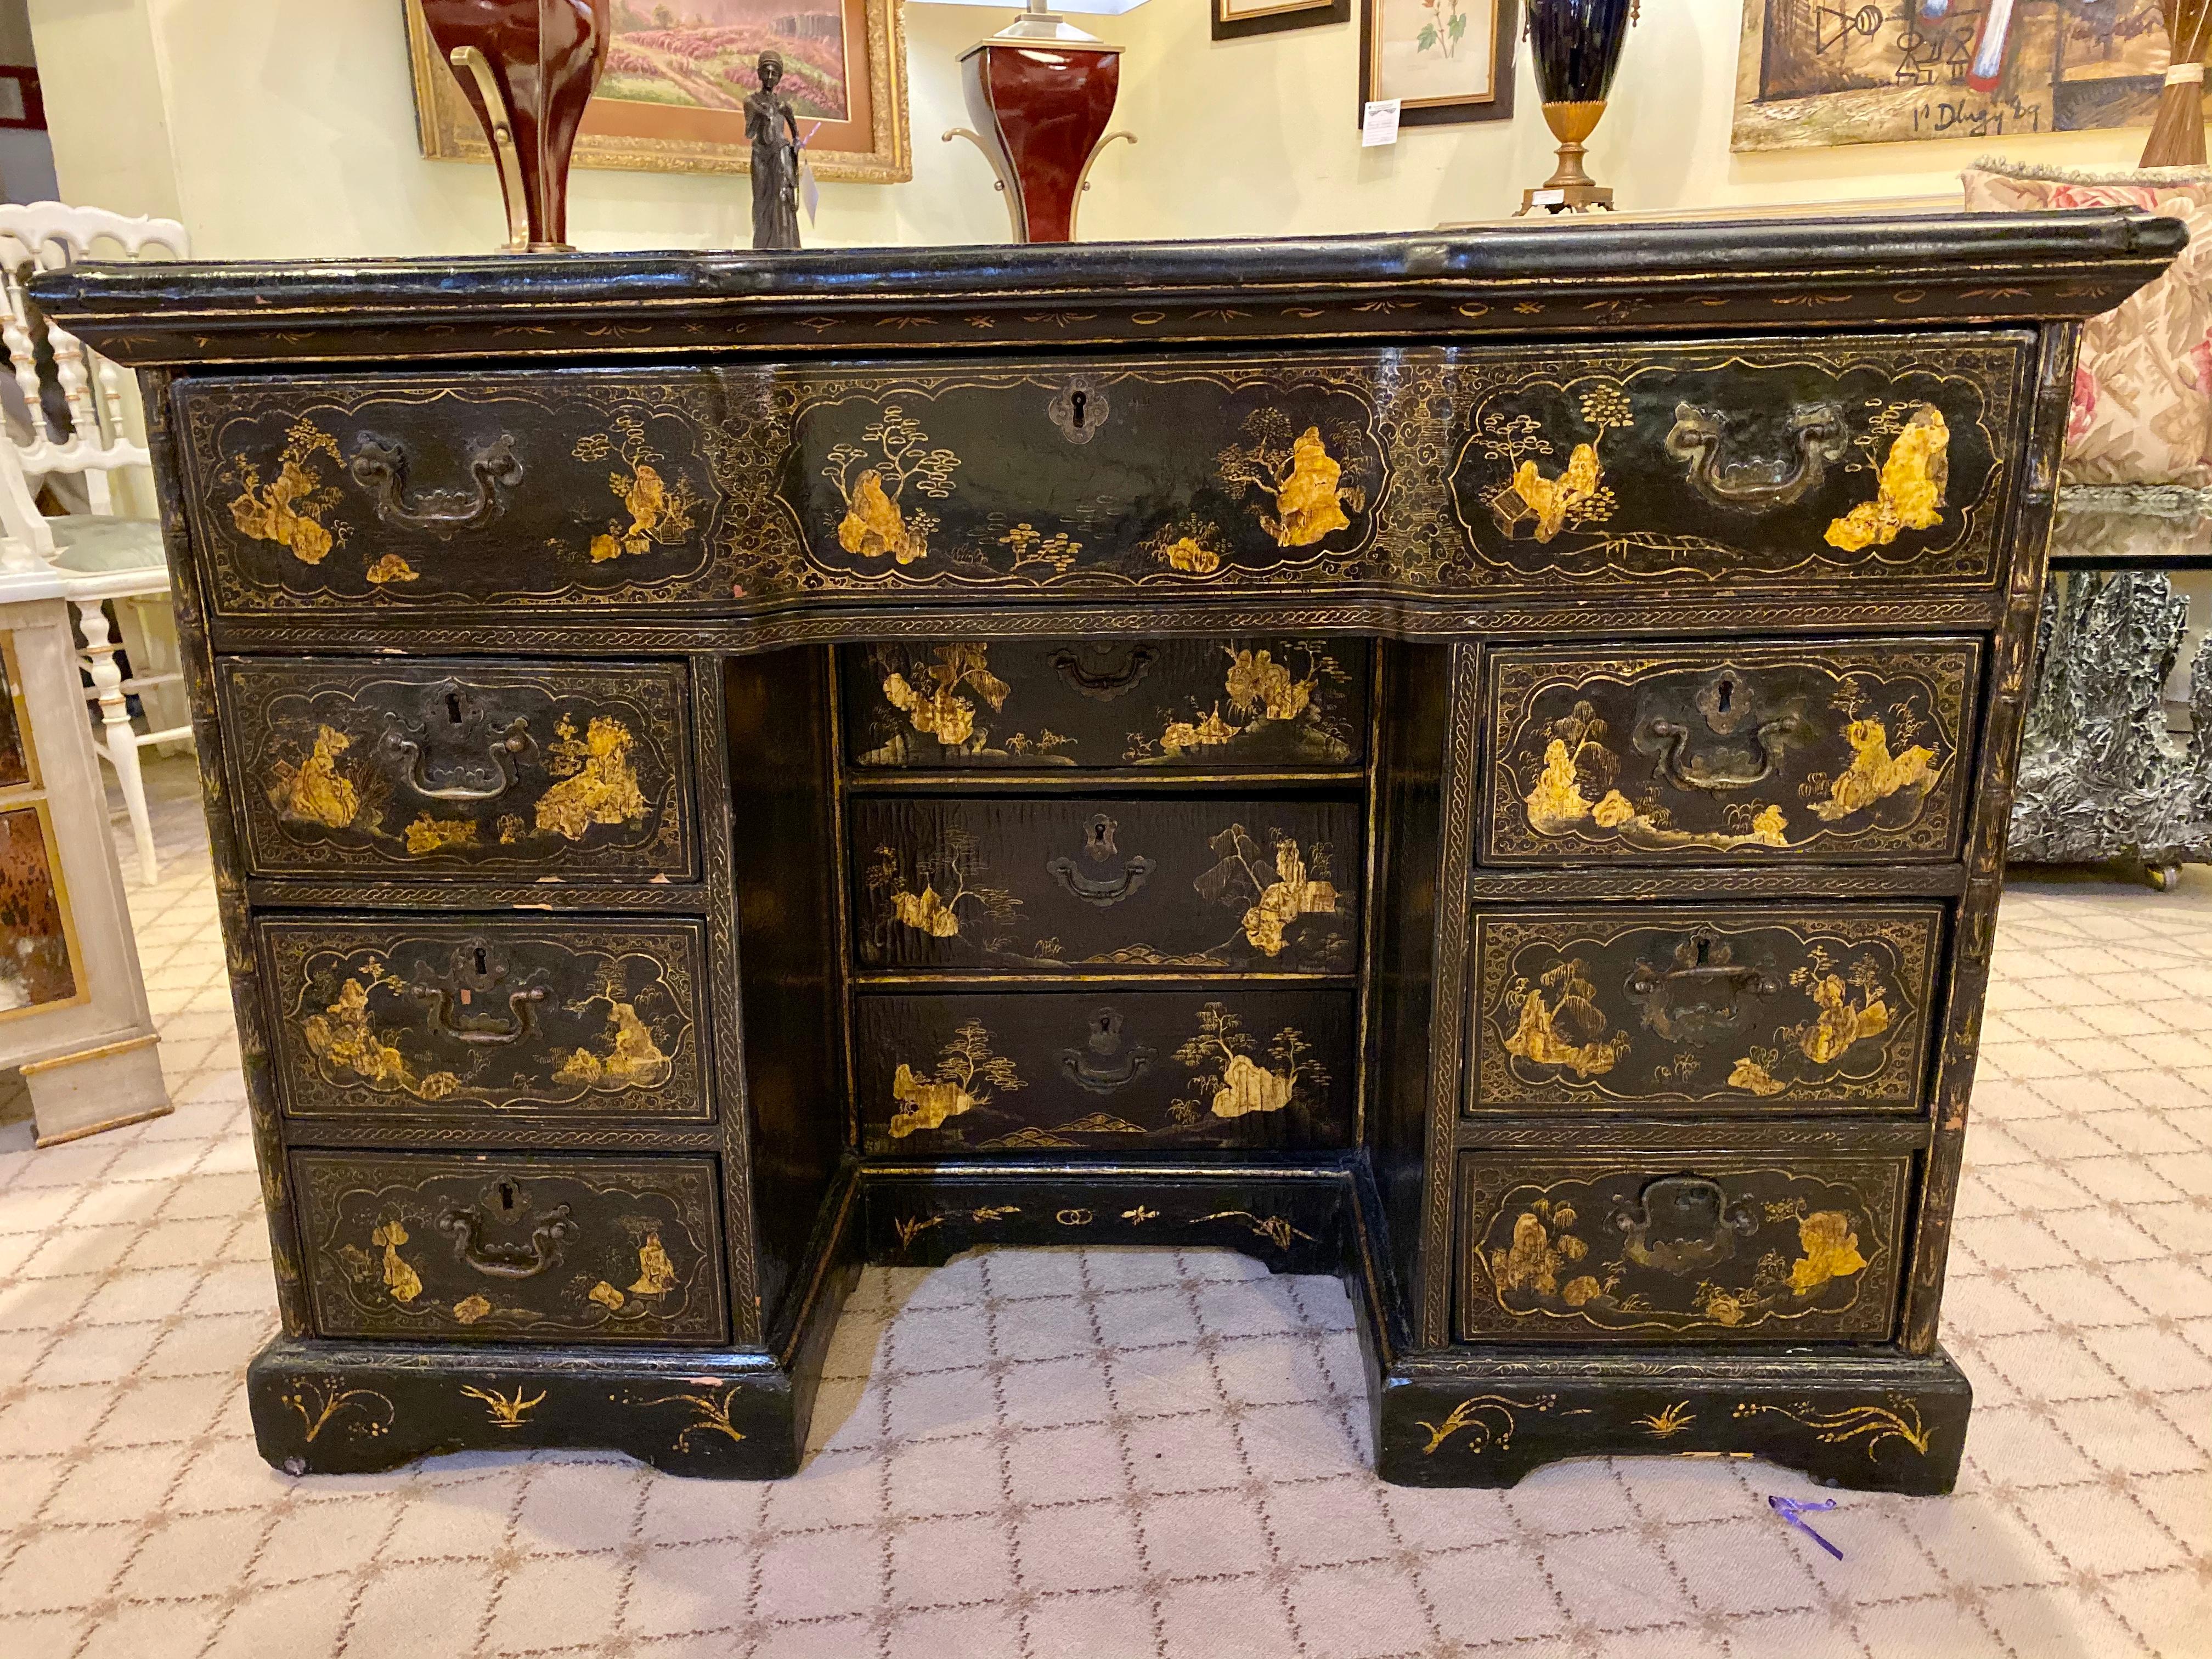 A wonderfully all over decorated Chinoiserie decorated knee hole desk. Decorated bracket Feet support the three central drawers flanked by a set of three matching drawers under a large upper drawer. The top and sides all over decorated in the 18th